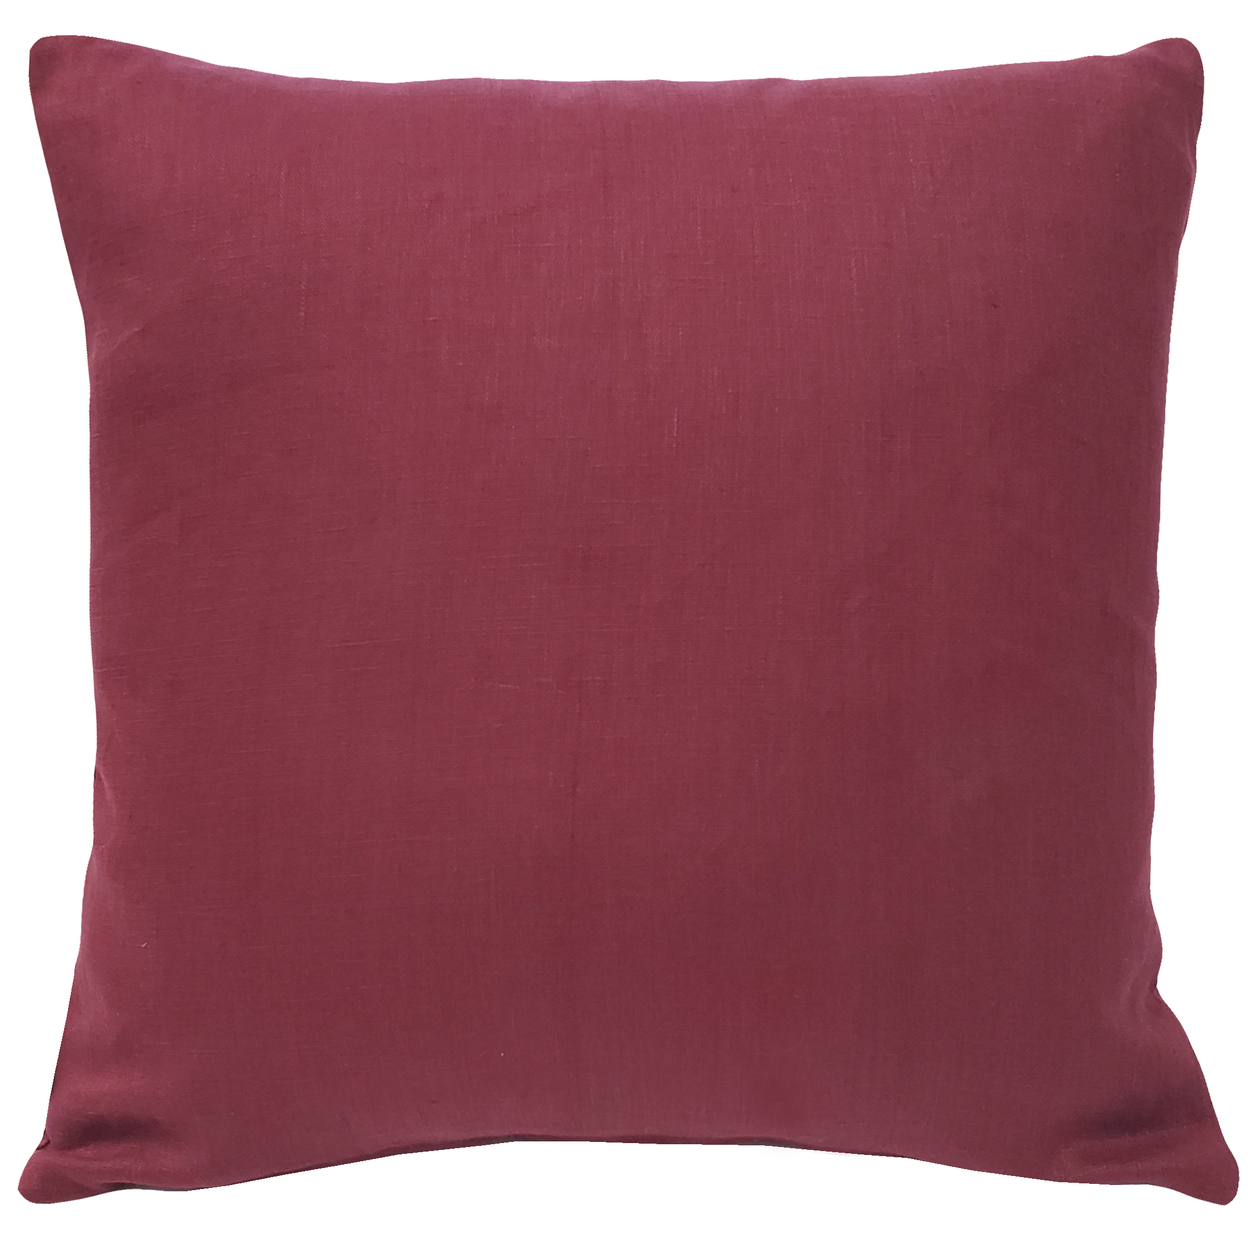 Tuscany Linen Wine Throw Pillow 20x20, With Polyfill Insert